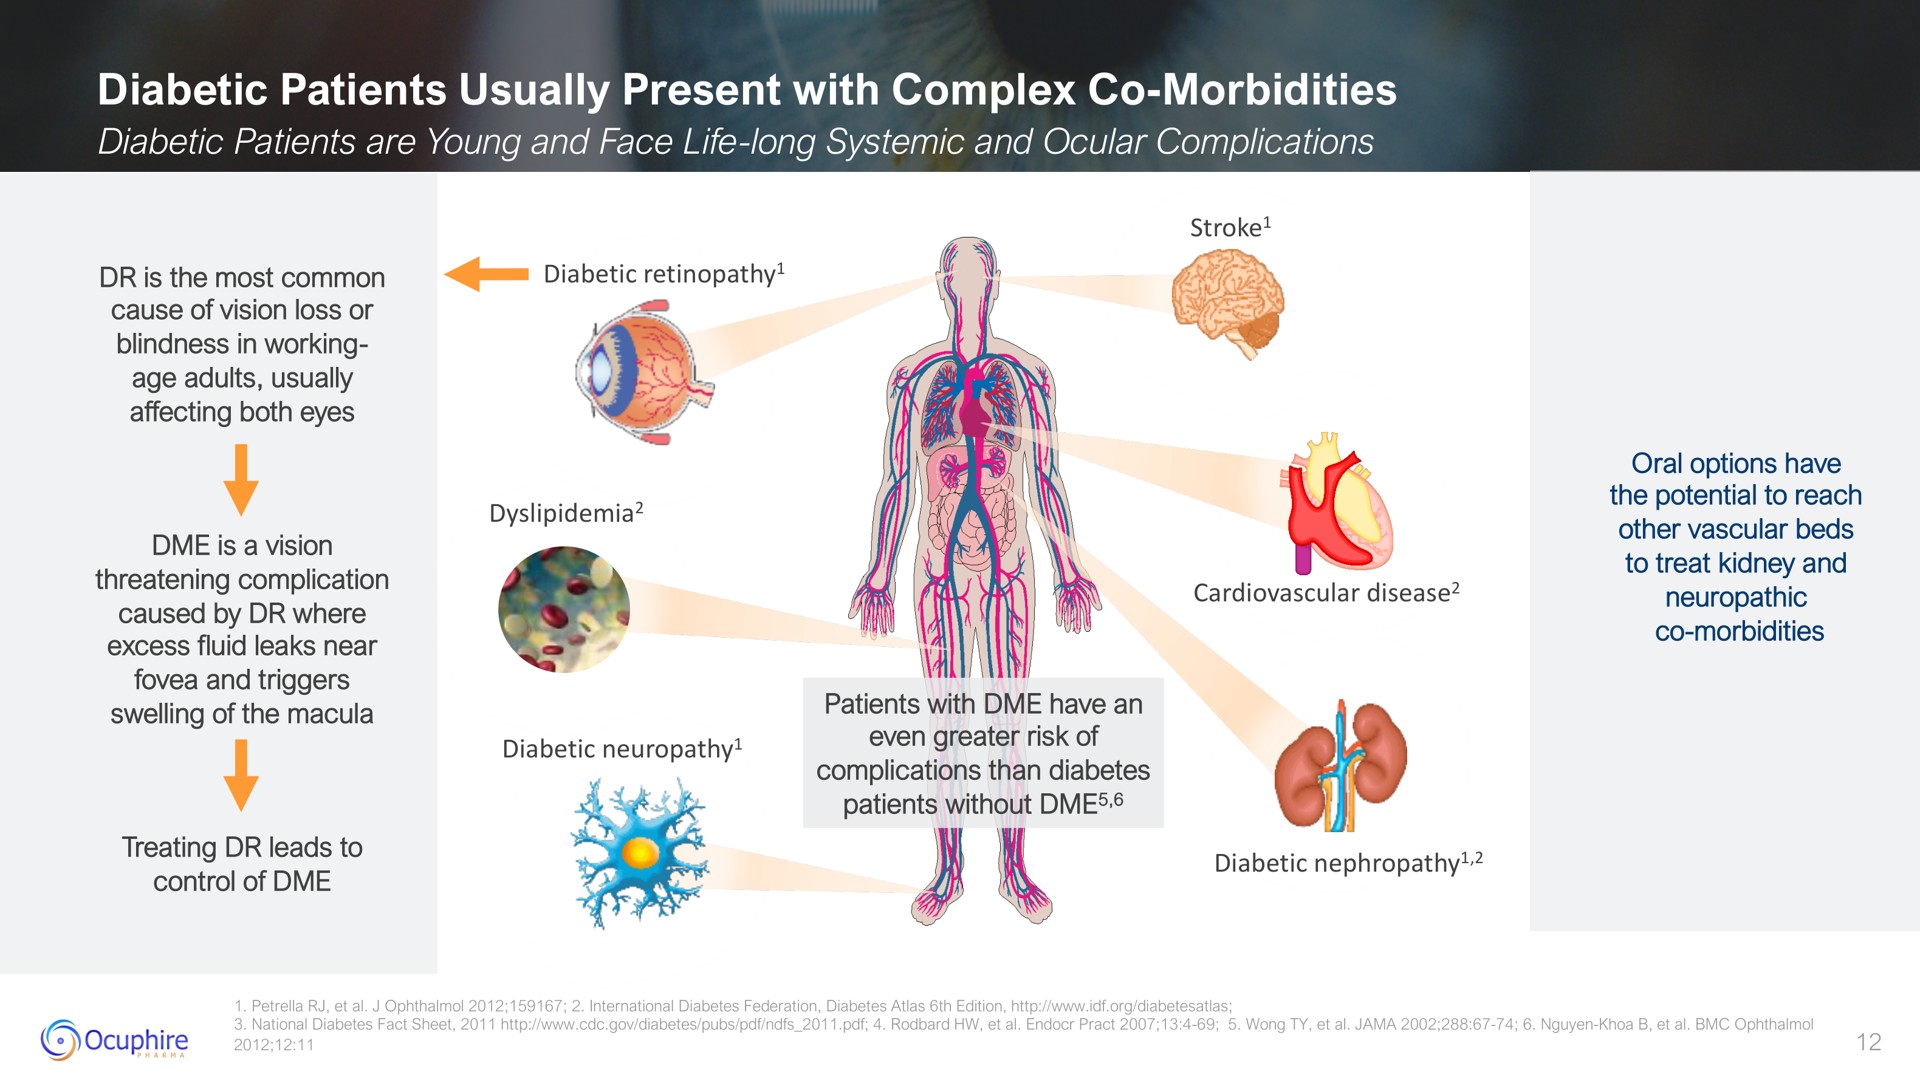 diabetic patients usually present with complex morbidities | Ocuphire Pharma